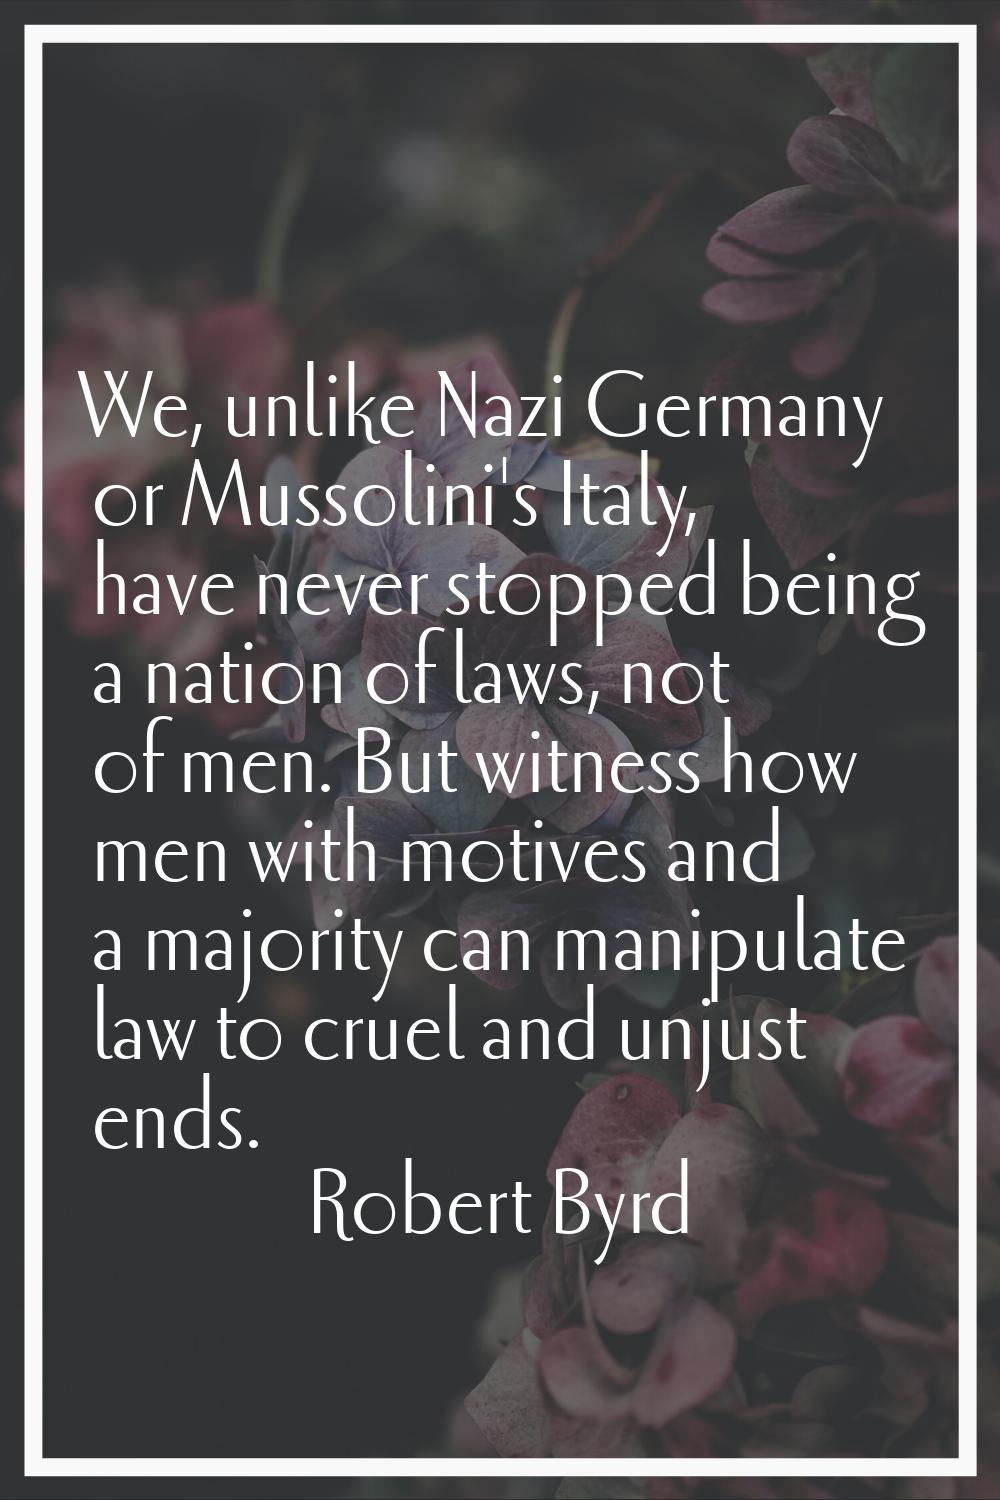 We, unlike Nazi Germany or Mussolini's Italy, have never stopped being a nation of laws, not of men